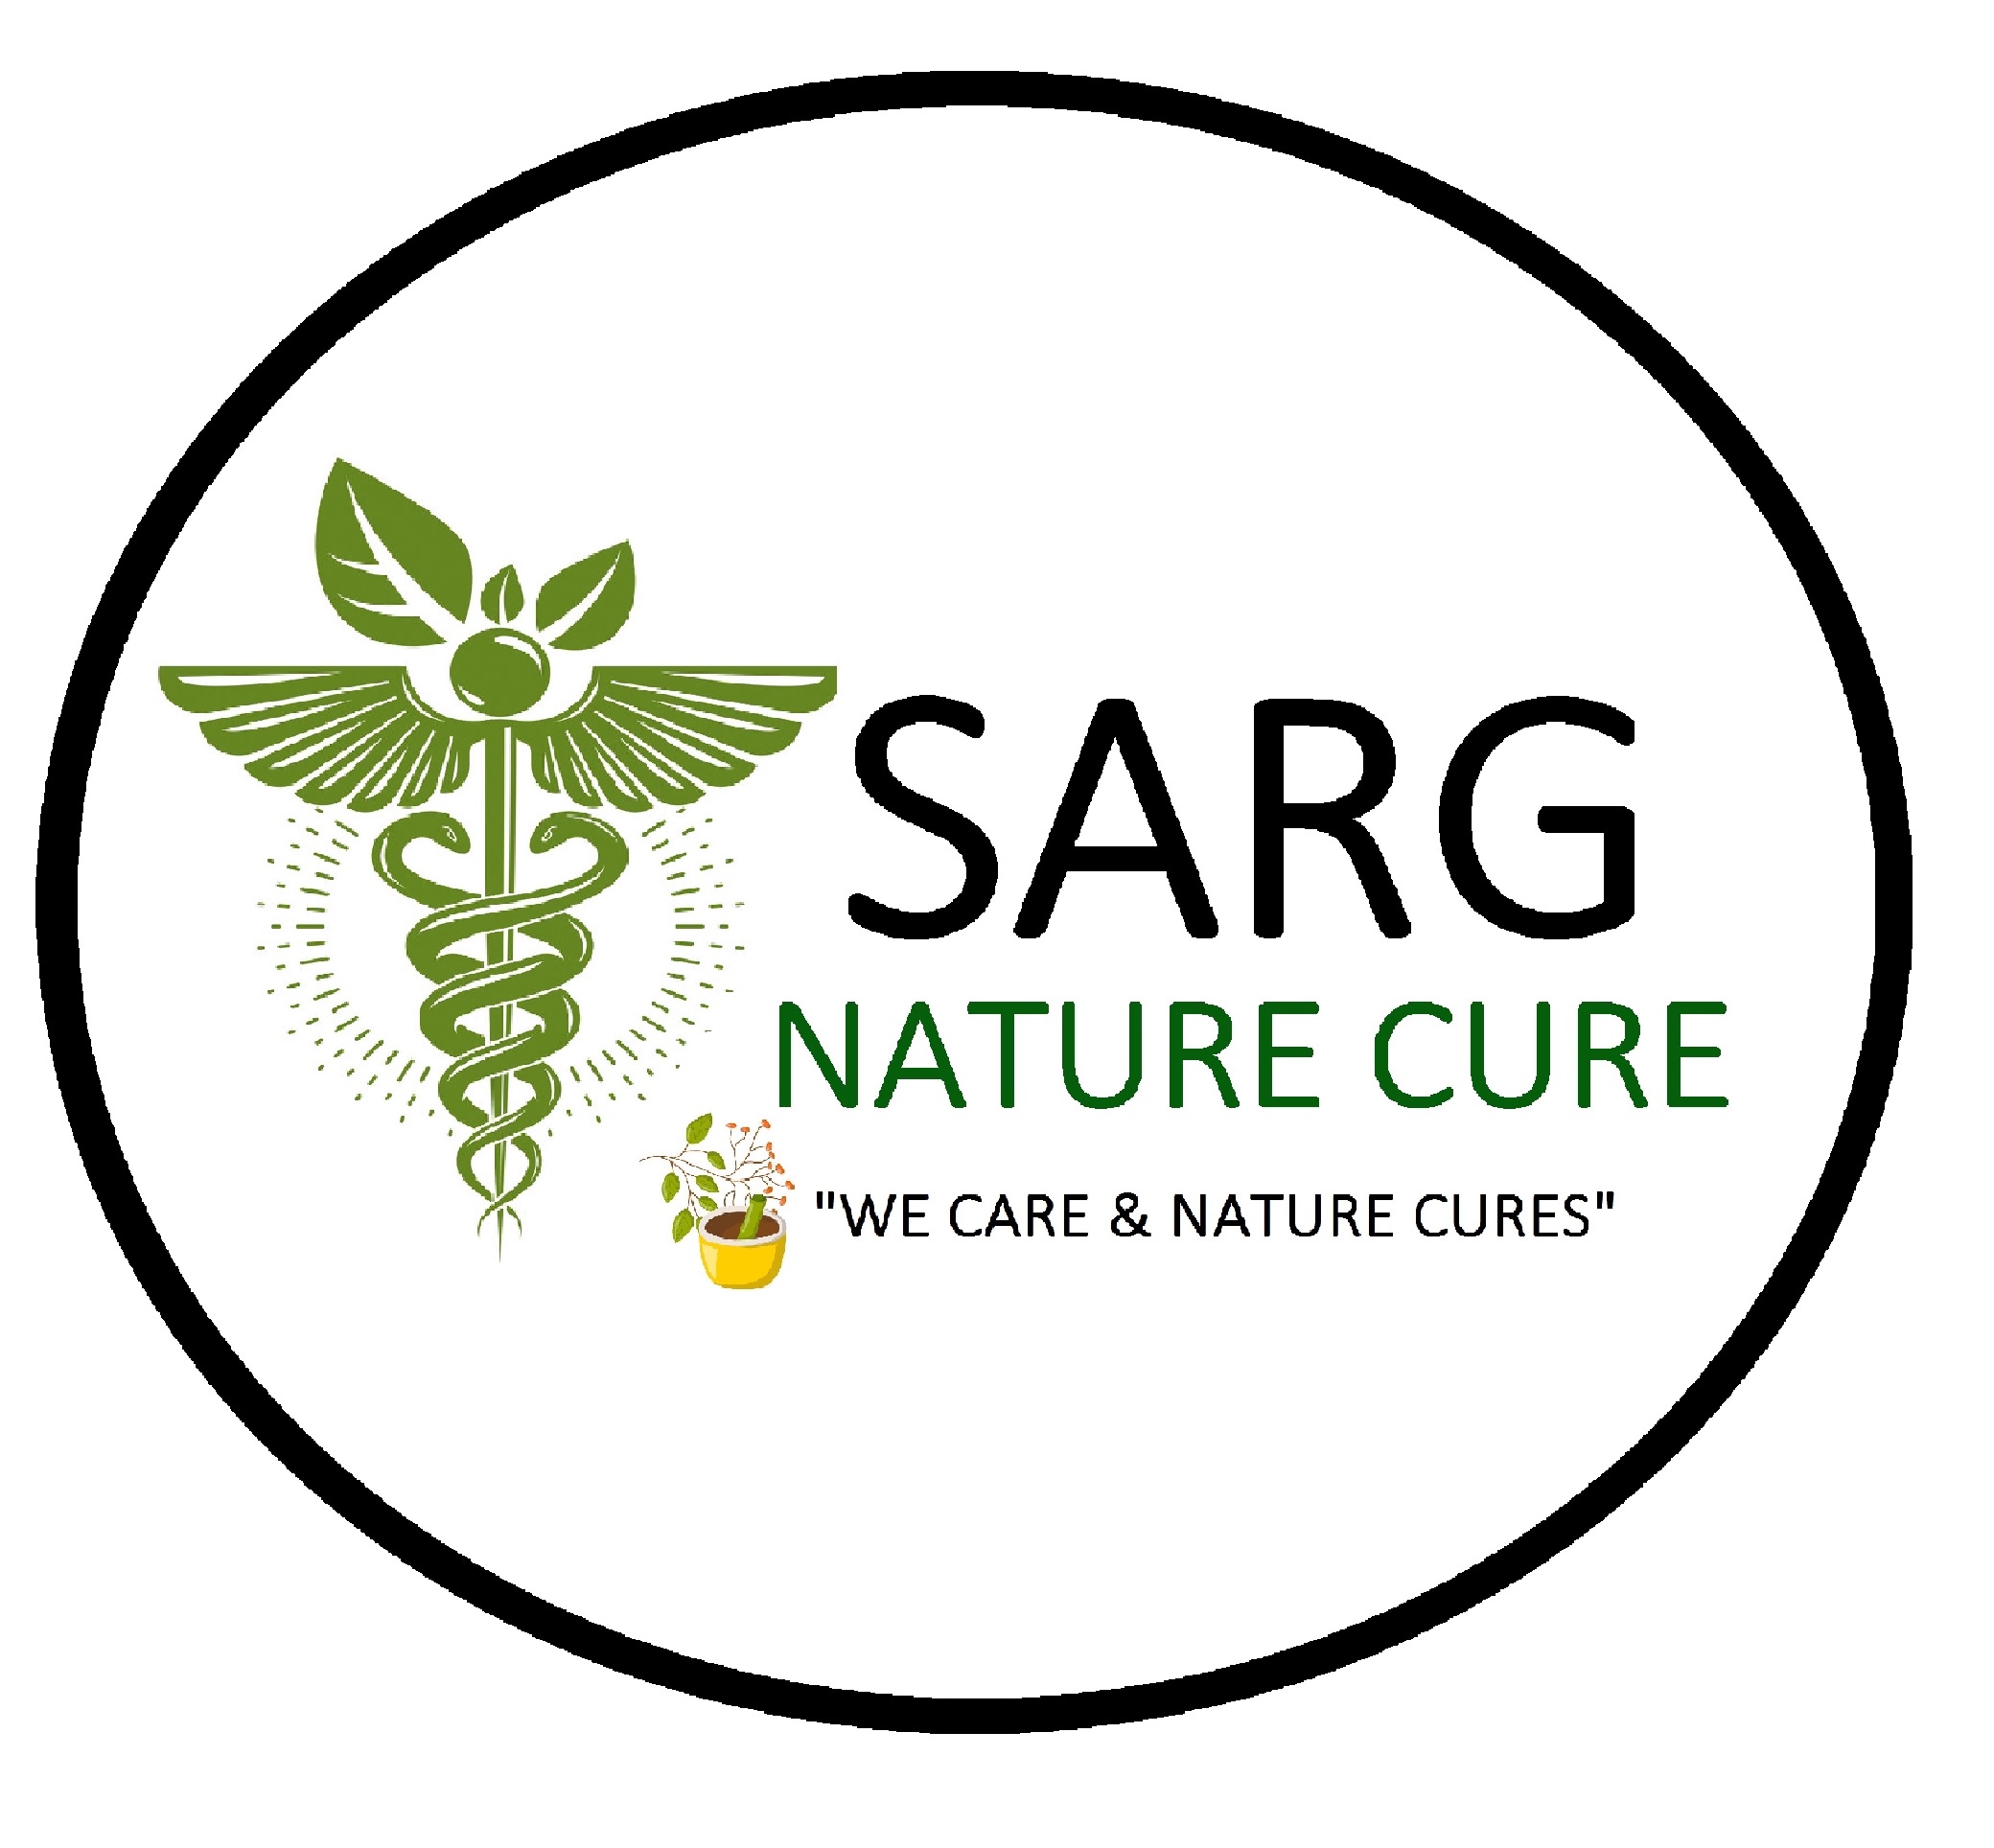 Sarg Nature Cure